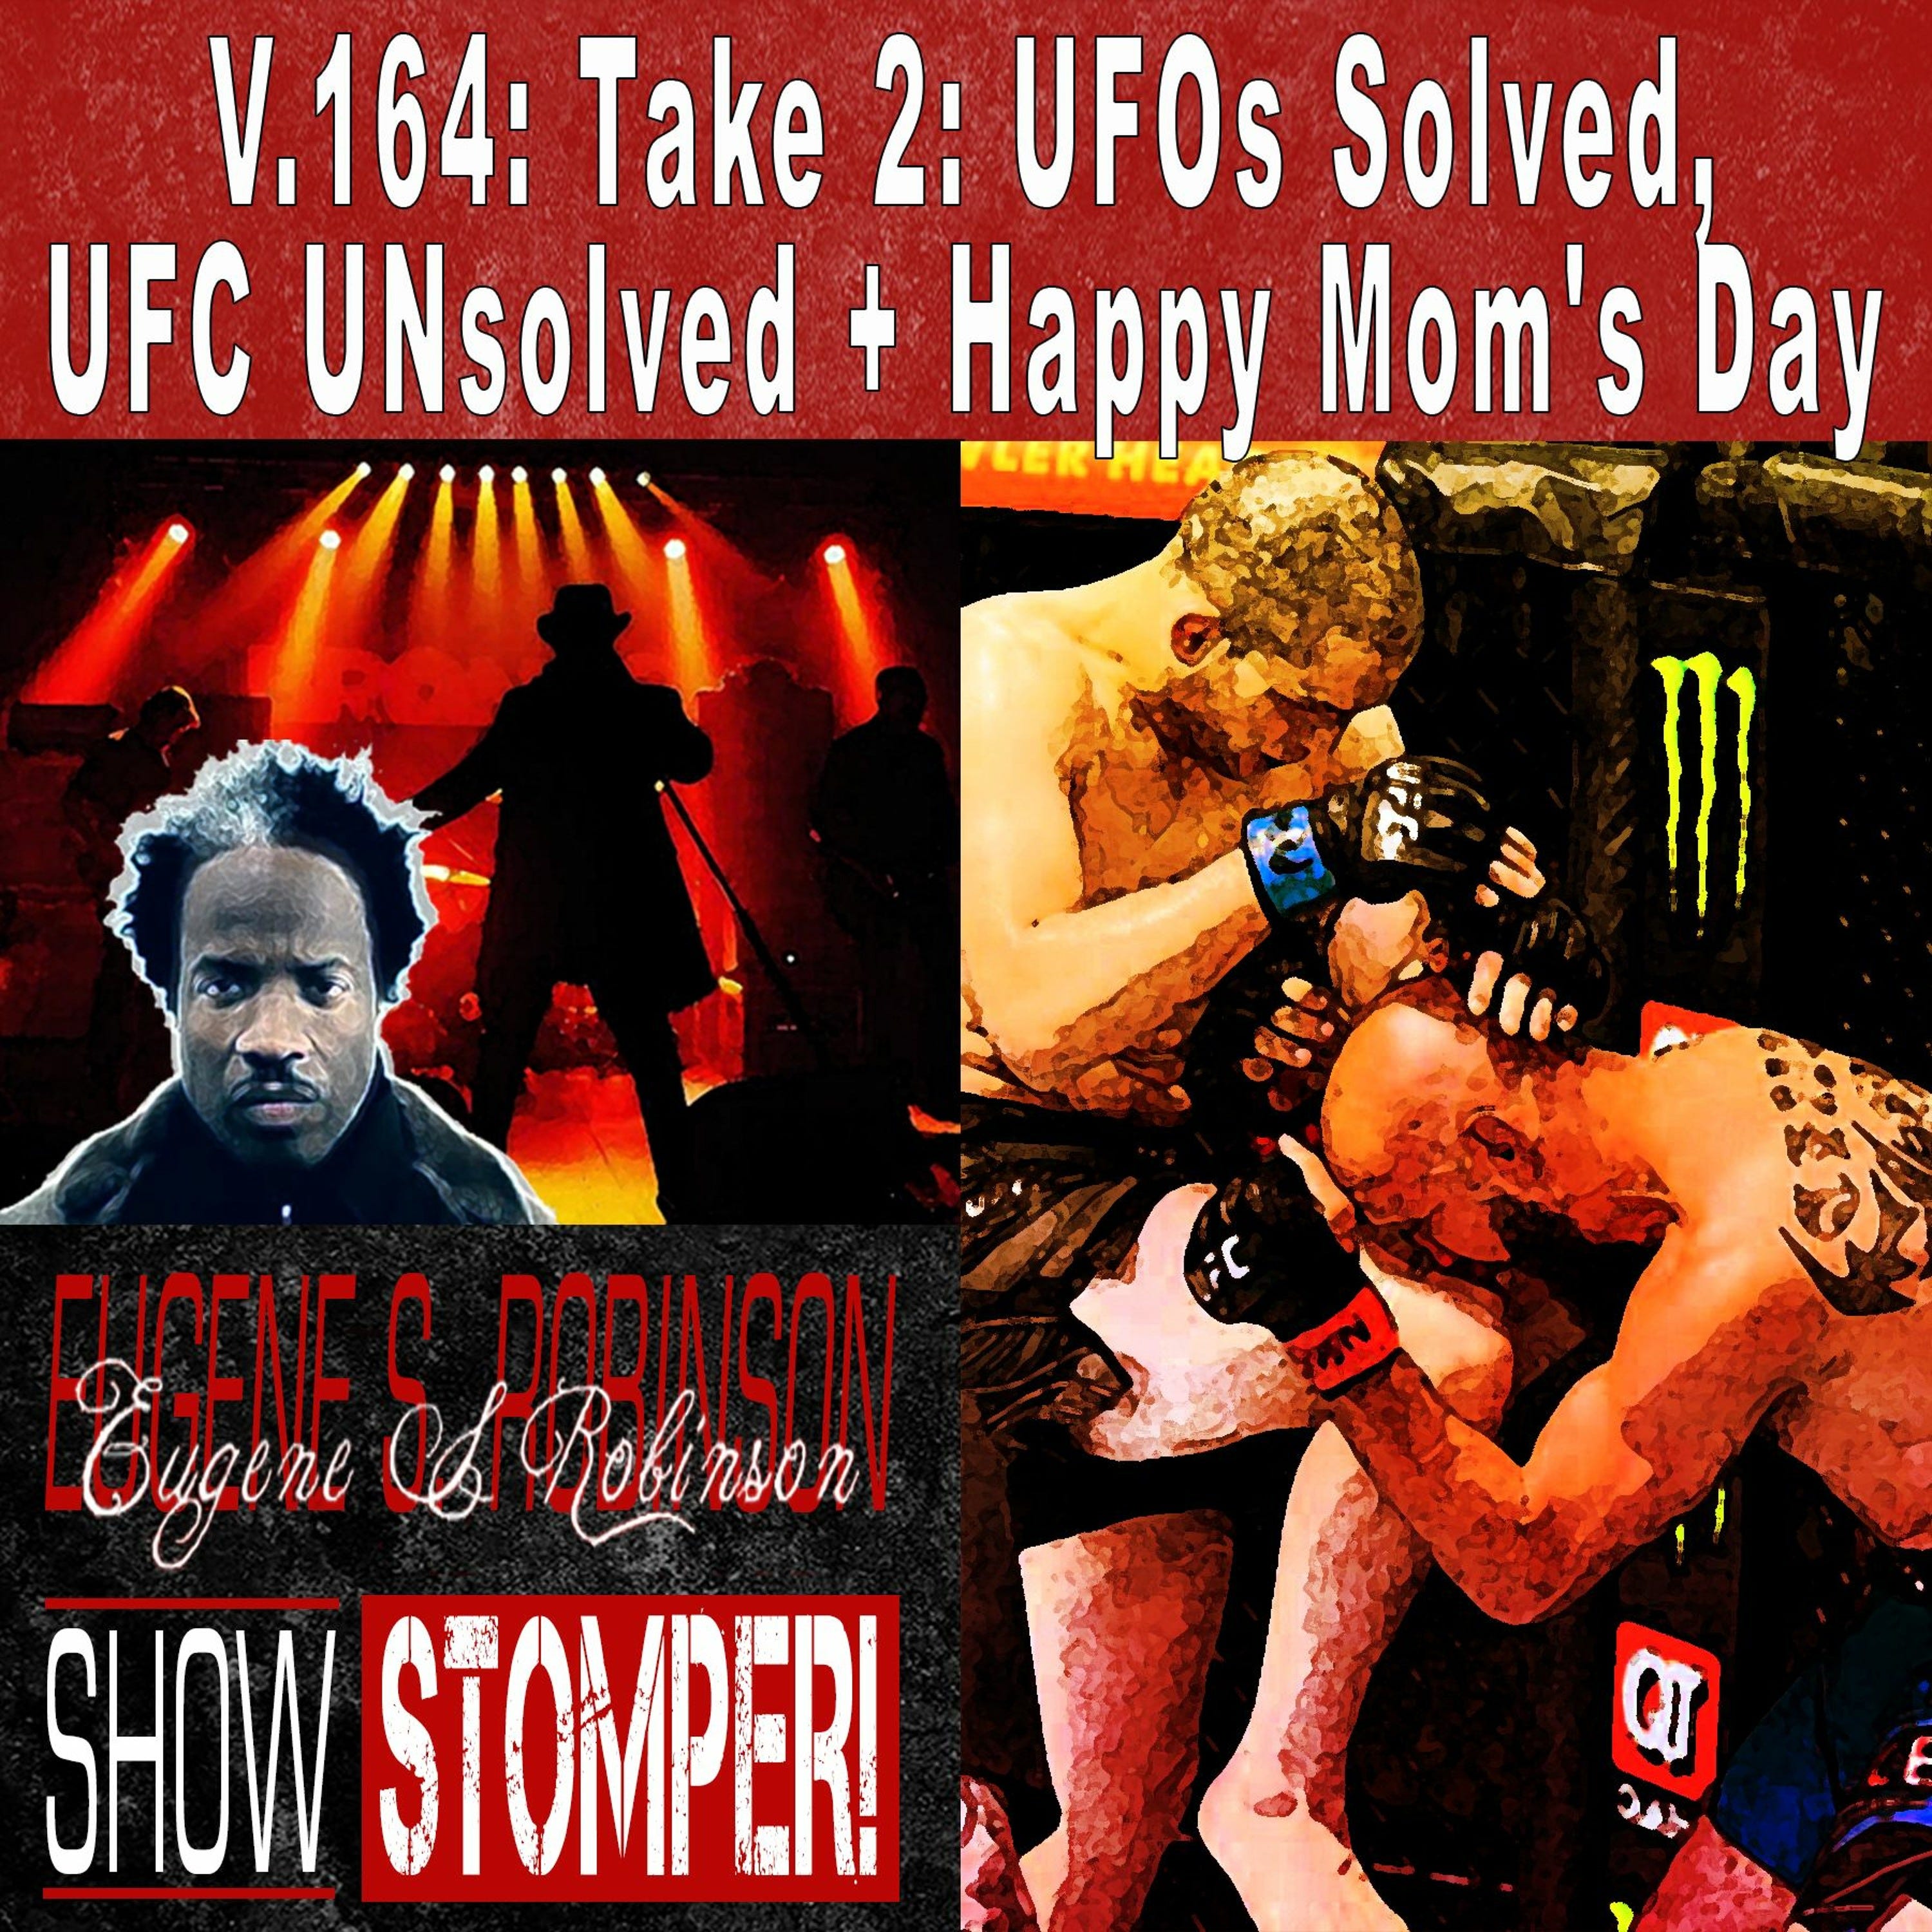 V.164 Take 2 UFOs Solved, UFC UNsolved + Happy Mom's Day On The Eugene S. Robinson Show Stomper!